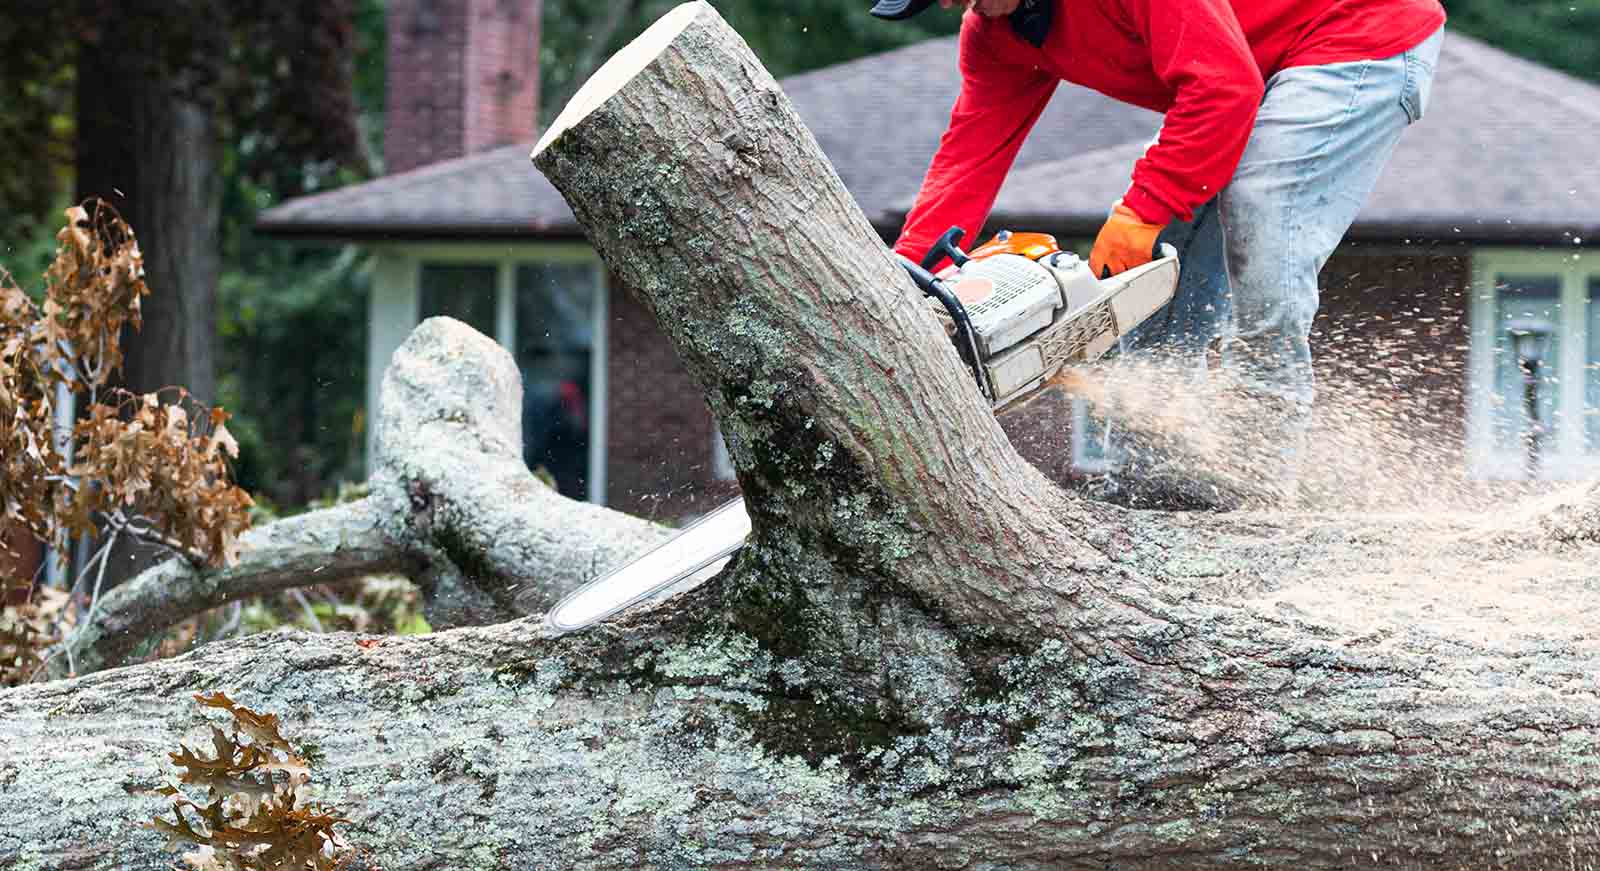 A landscaper is removing a tree that fell during a storm using a chainsaw to slice it into pieces.